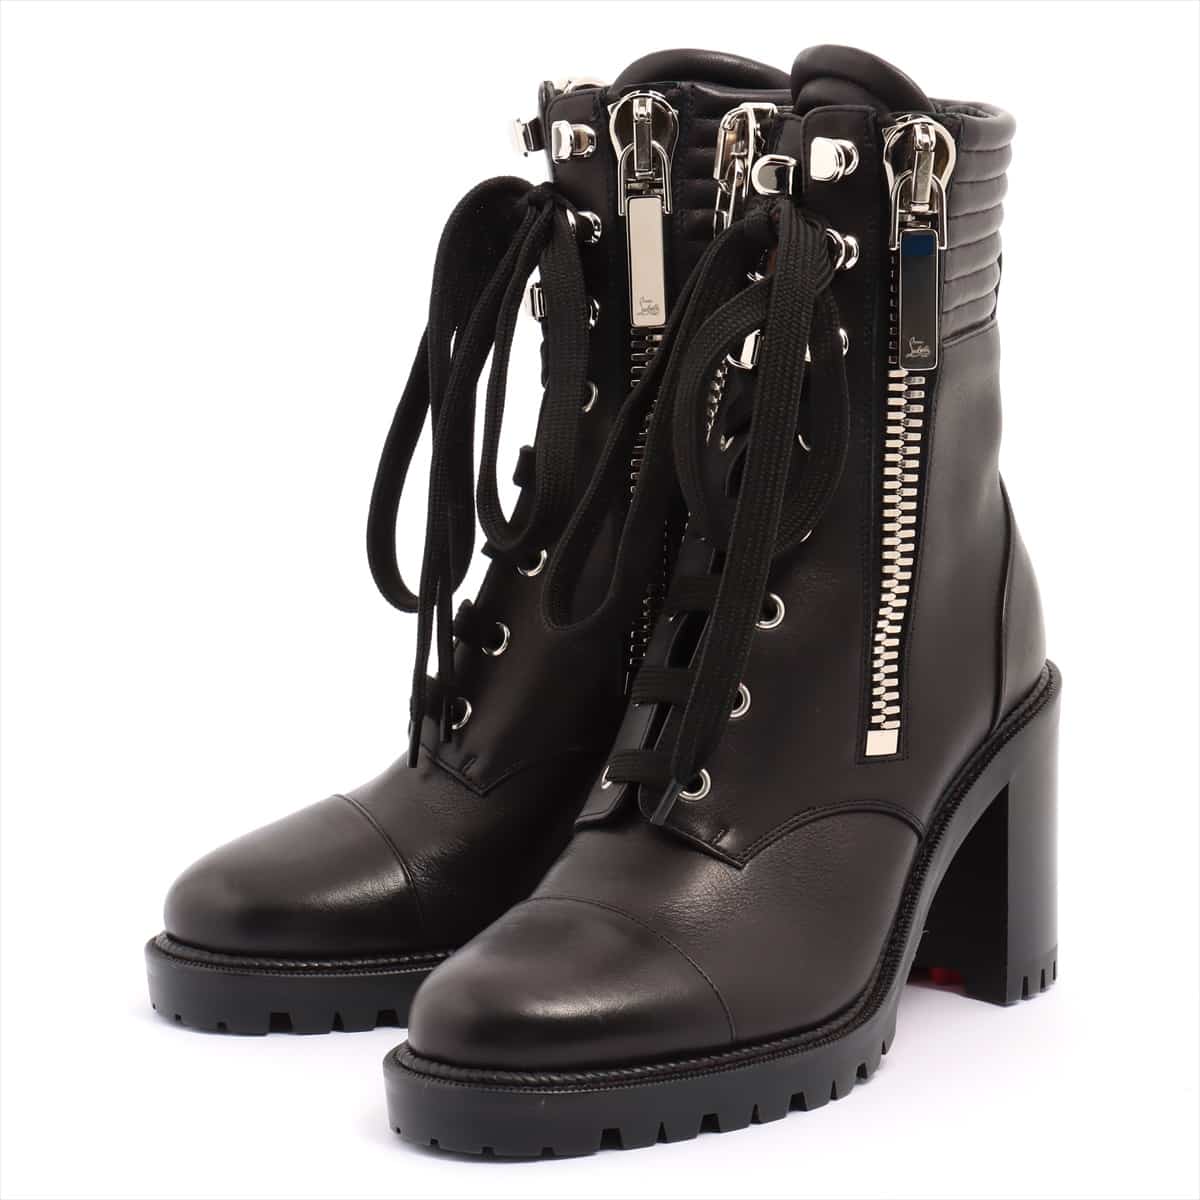 Christian Louboutin Leather Short Boots 36 Ladies' Black